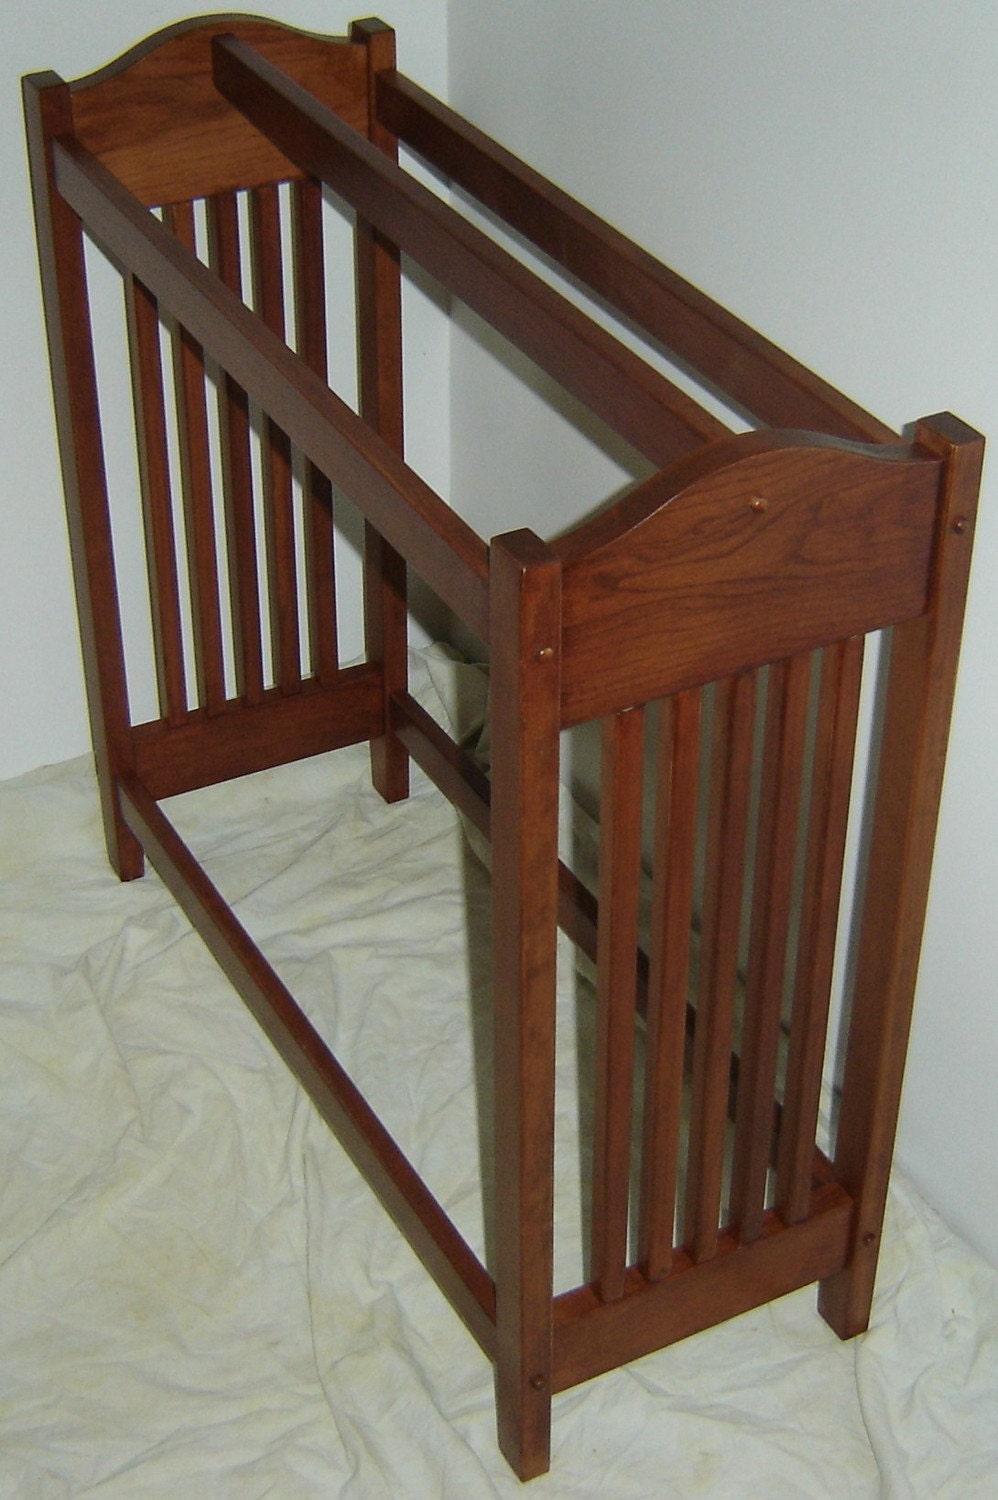 Hand Crafted NEW Solid Cherry Wood Mission Style Quilt Rack